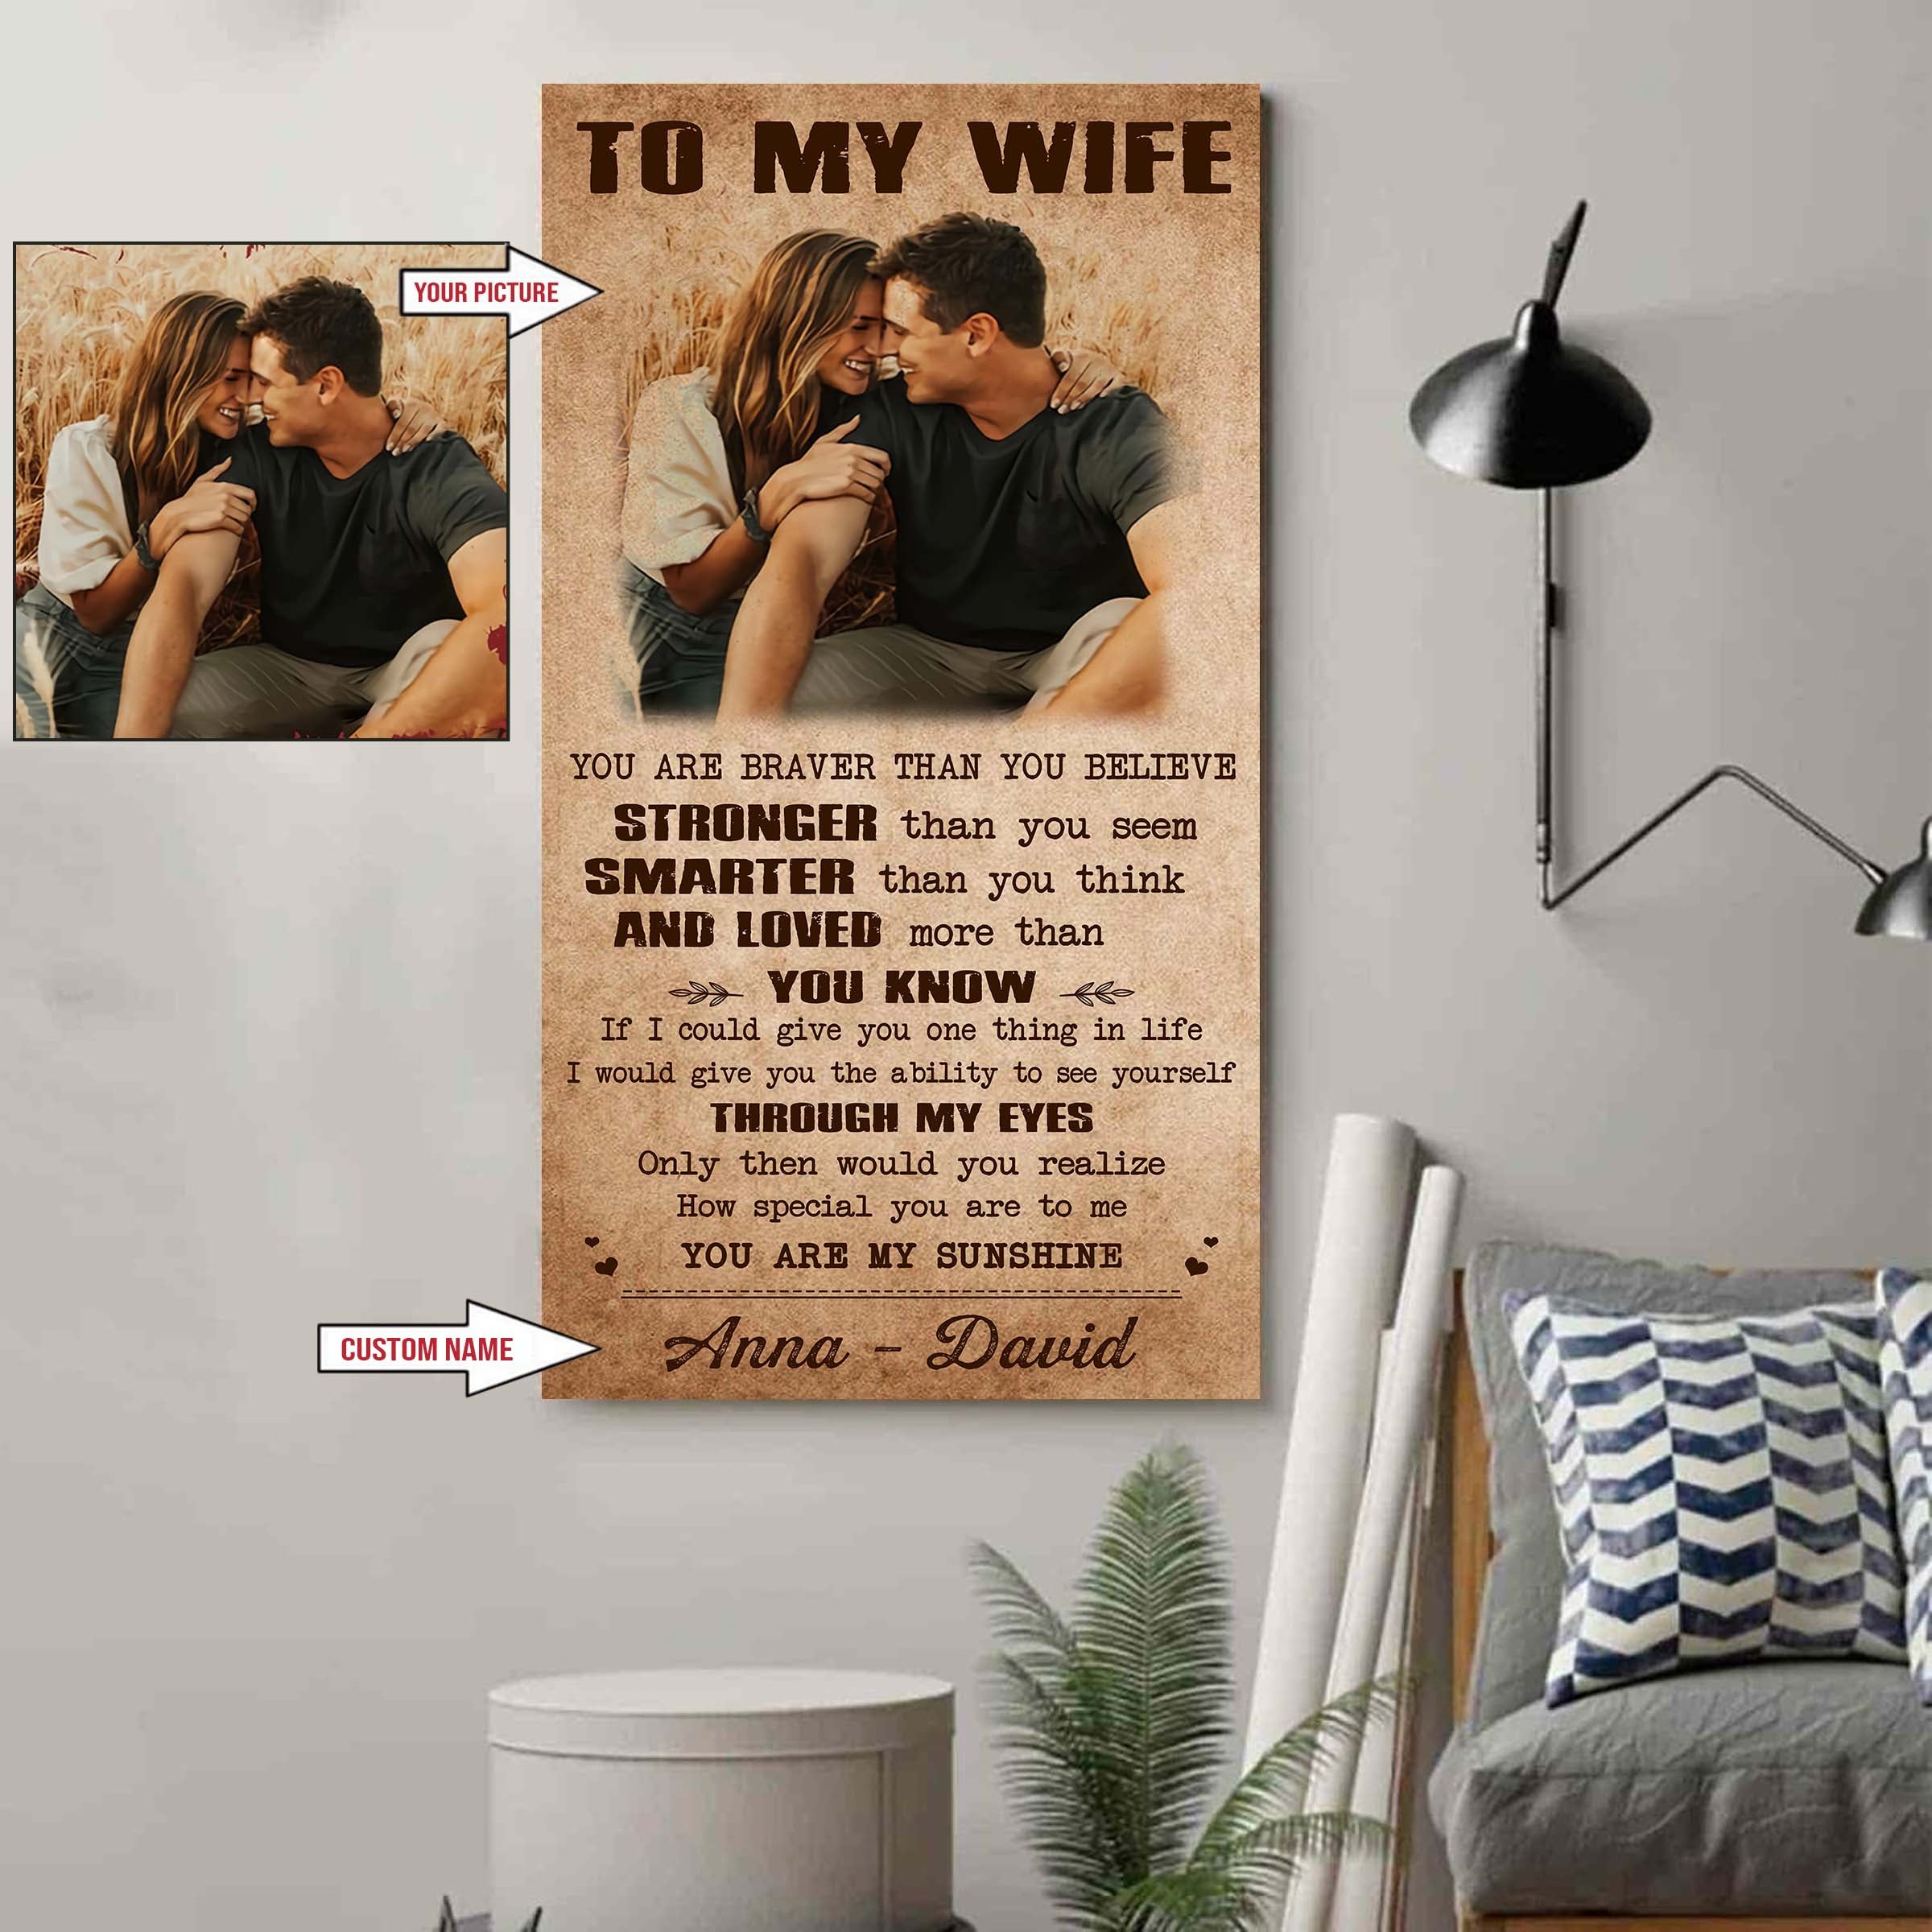 Valentine gifts-Custom image canvas-Husband to Wife- If I could give you one thing in life